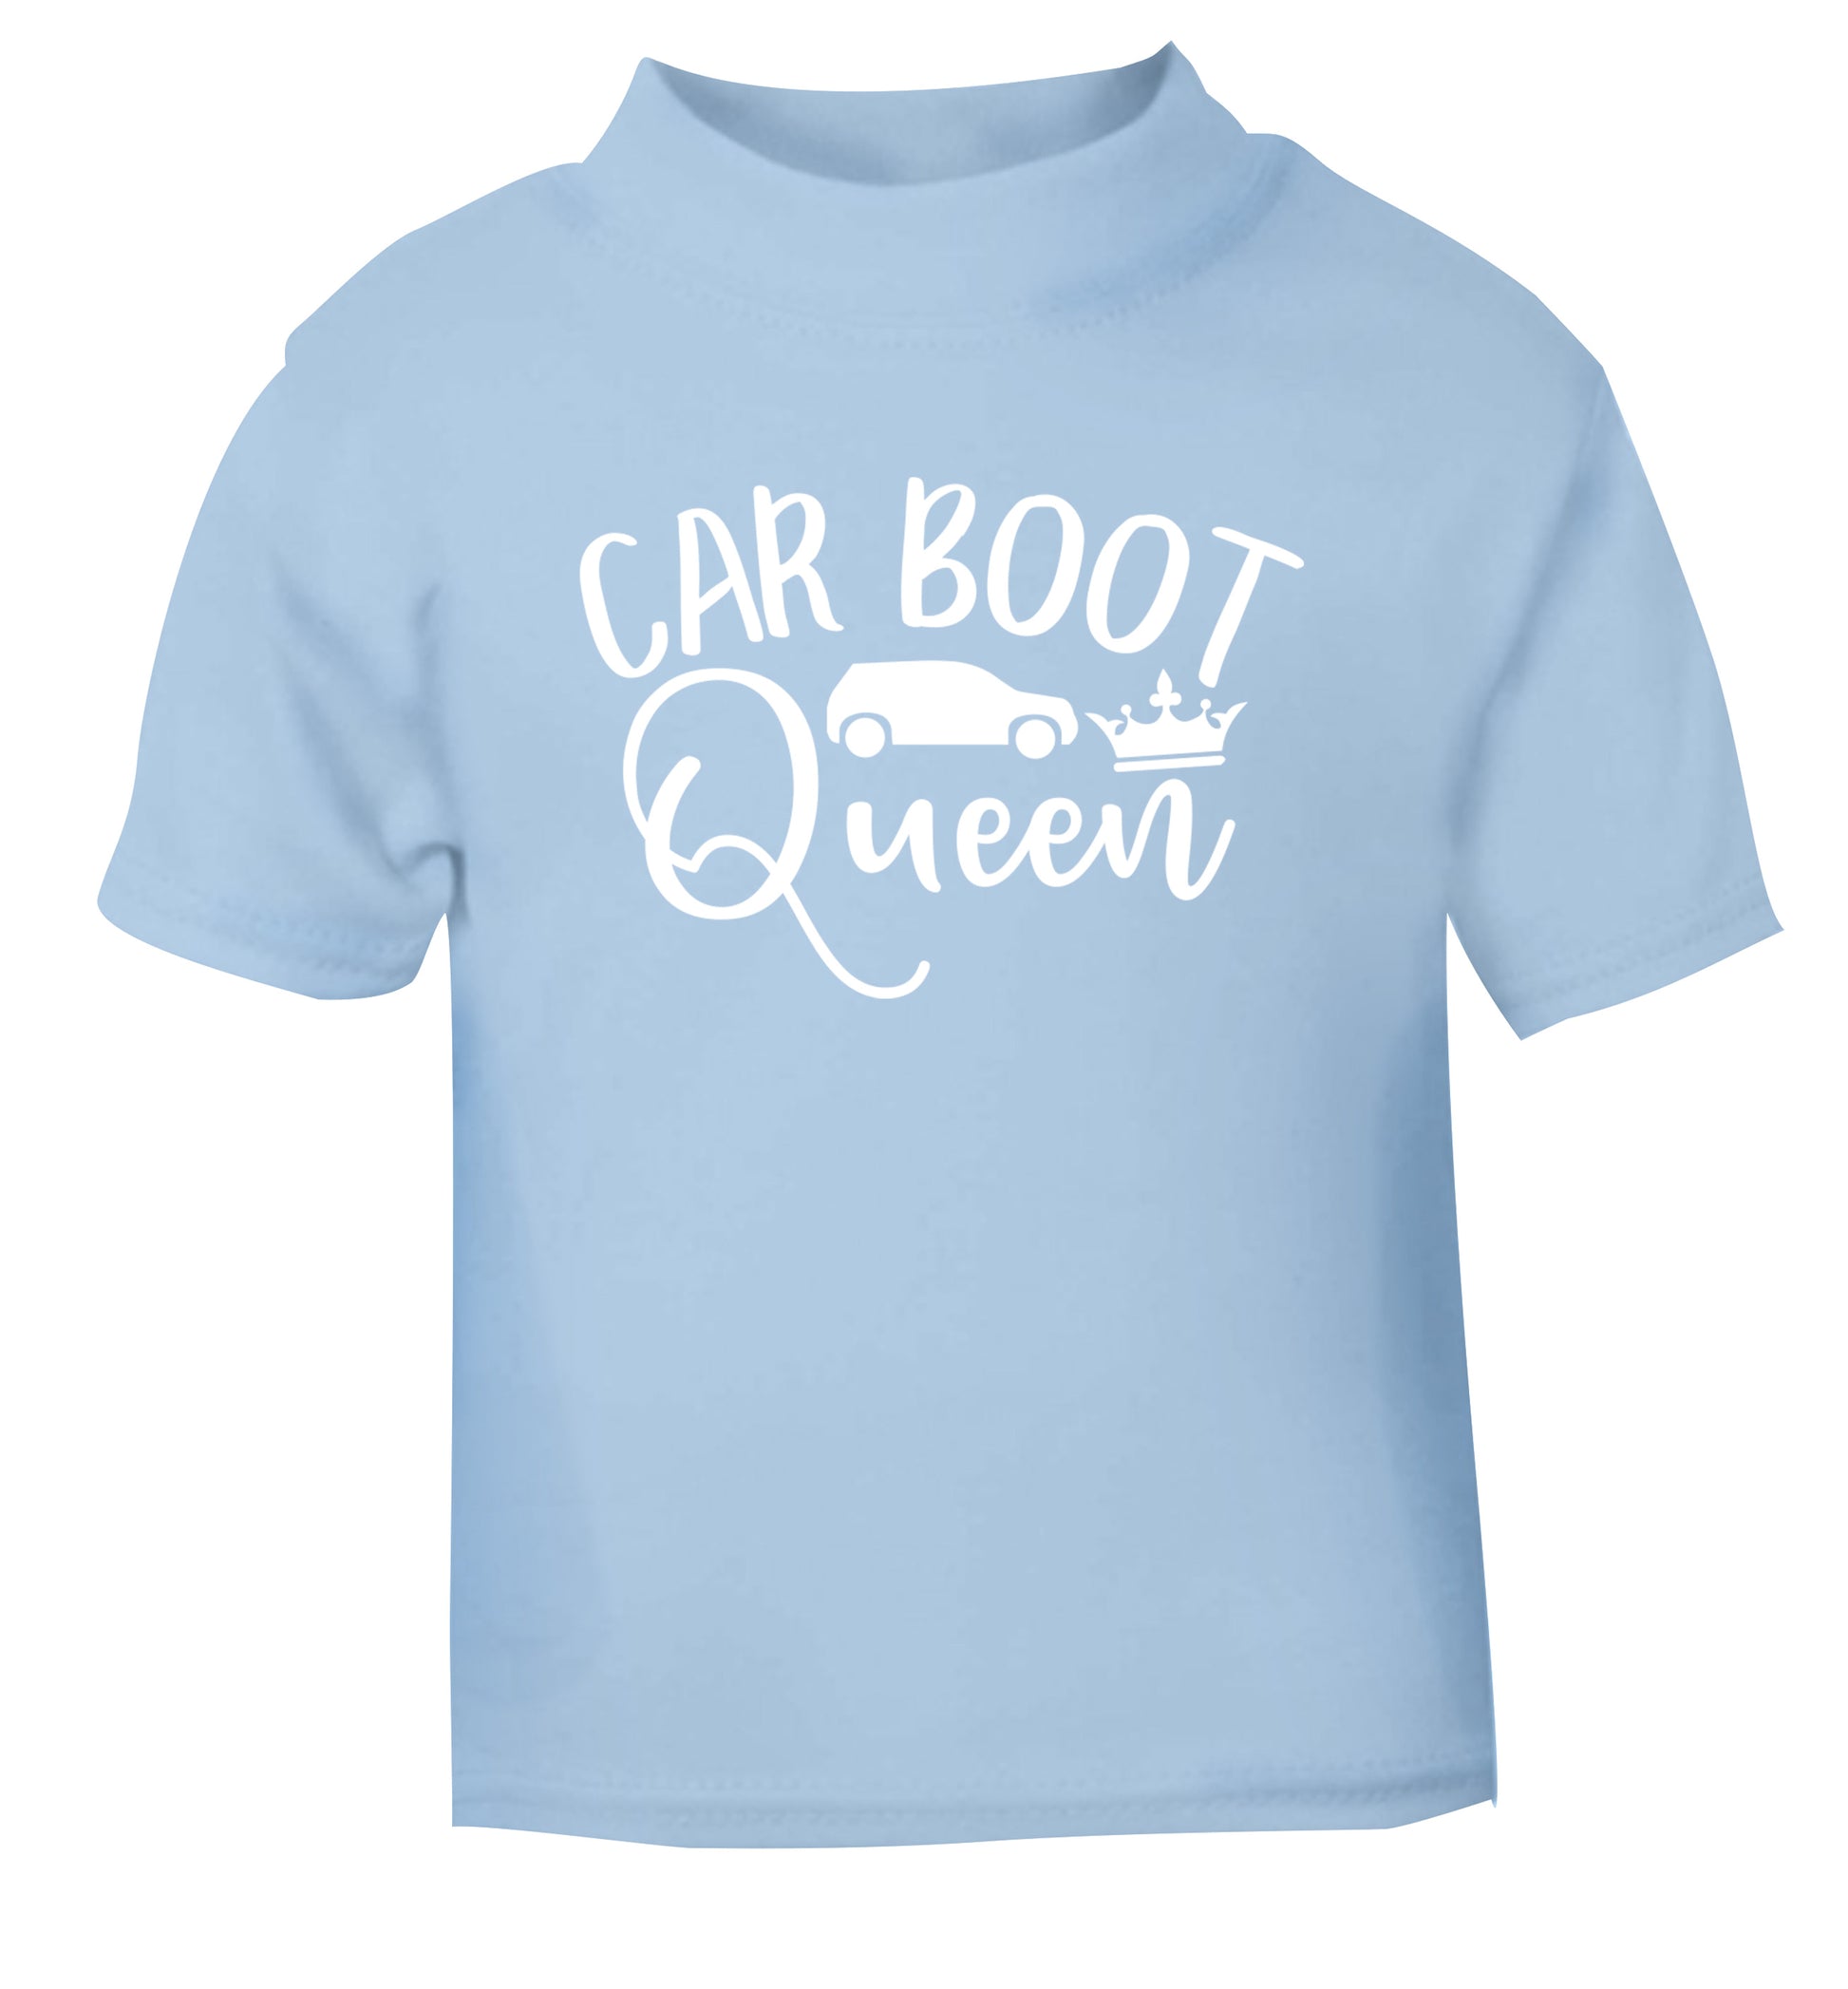 Carboot Queen light blue Baby Toddler Tshirt 2 Years